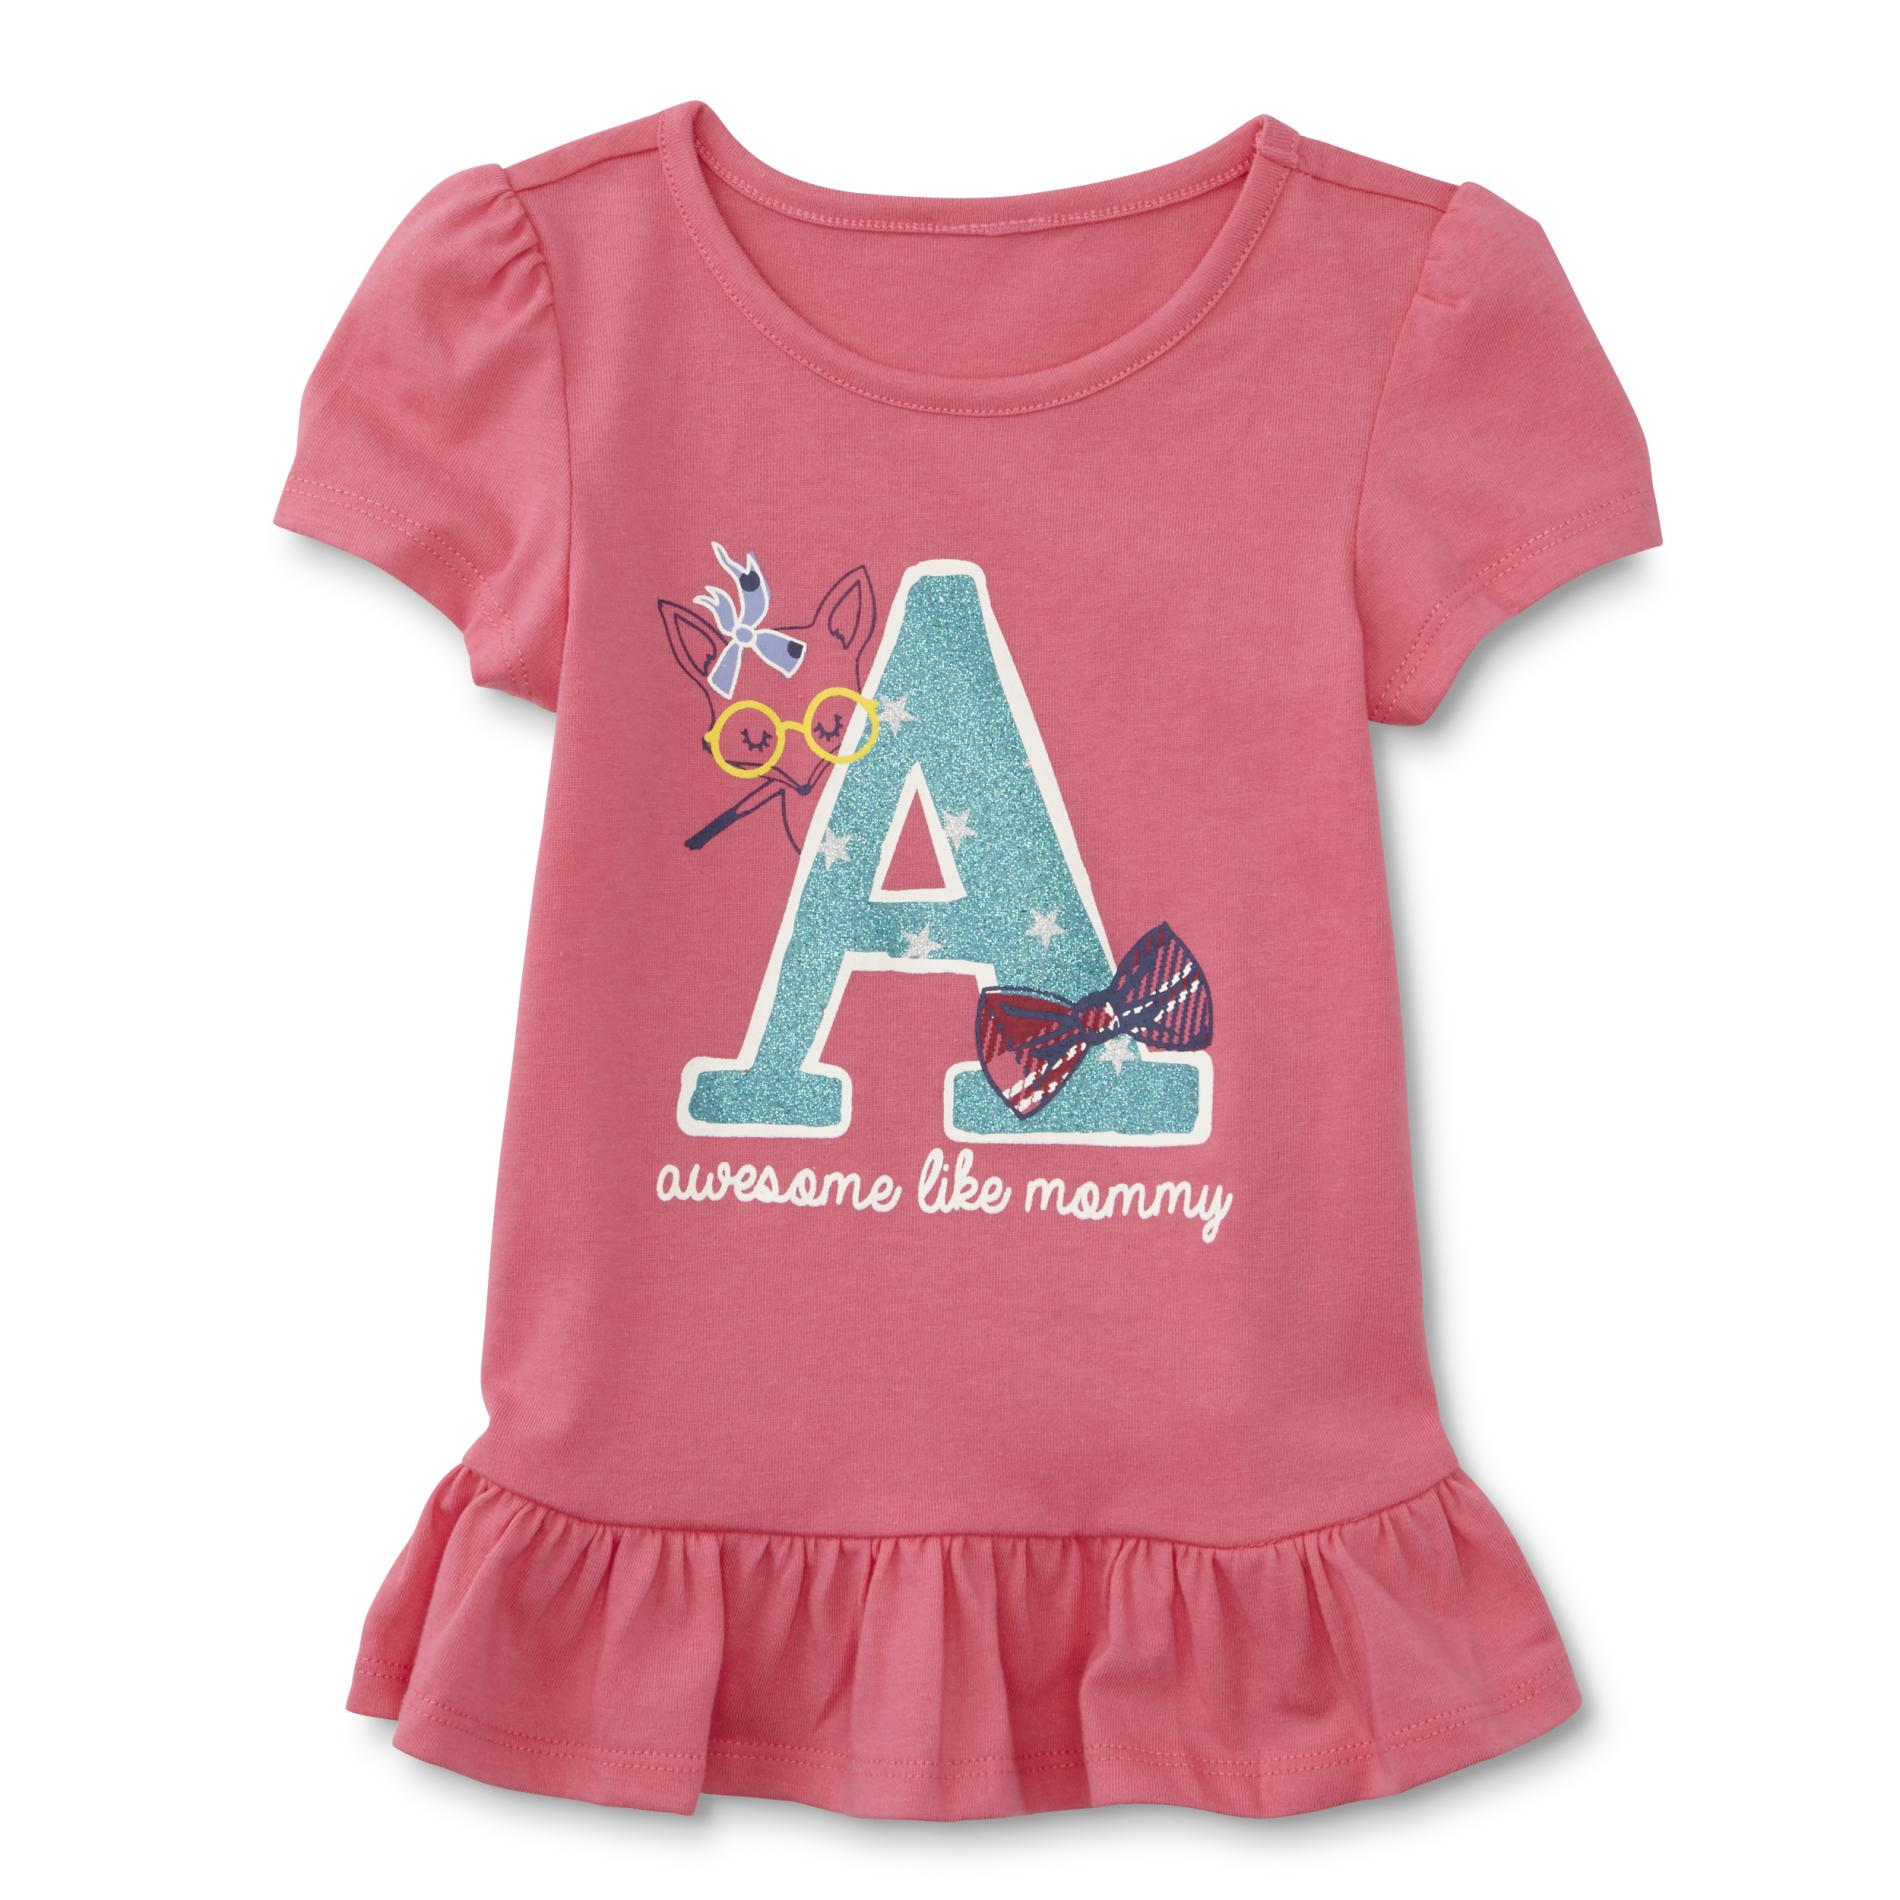 WonderKids Infant & Toddler Girl's Peplum Top - Awesome Like Mommy